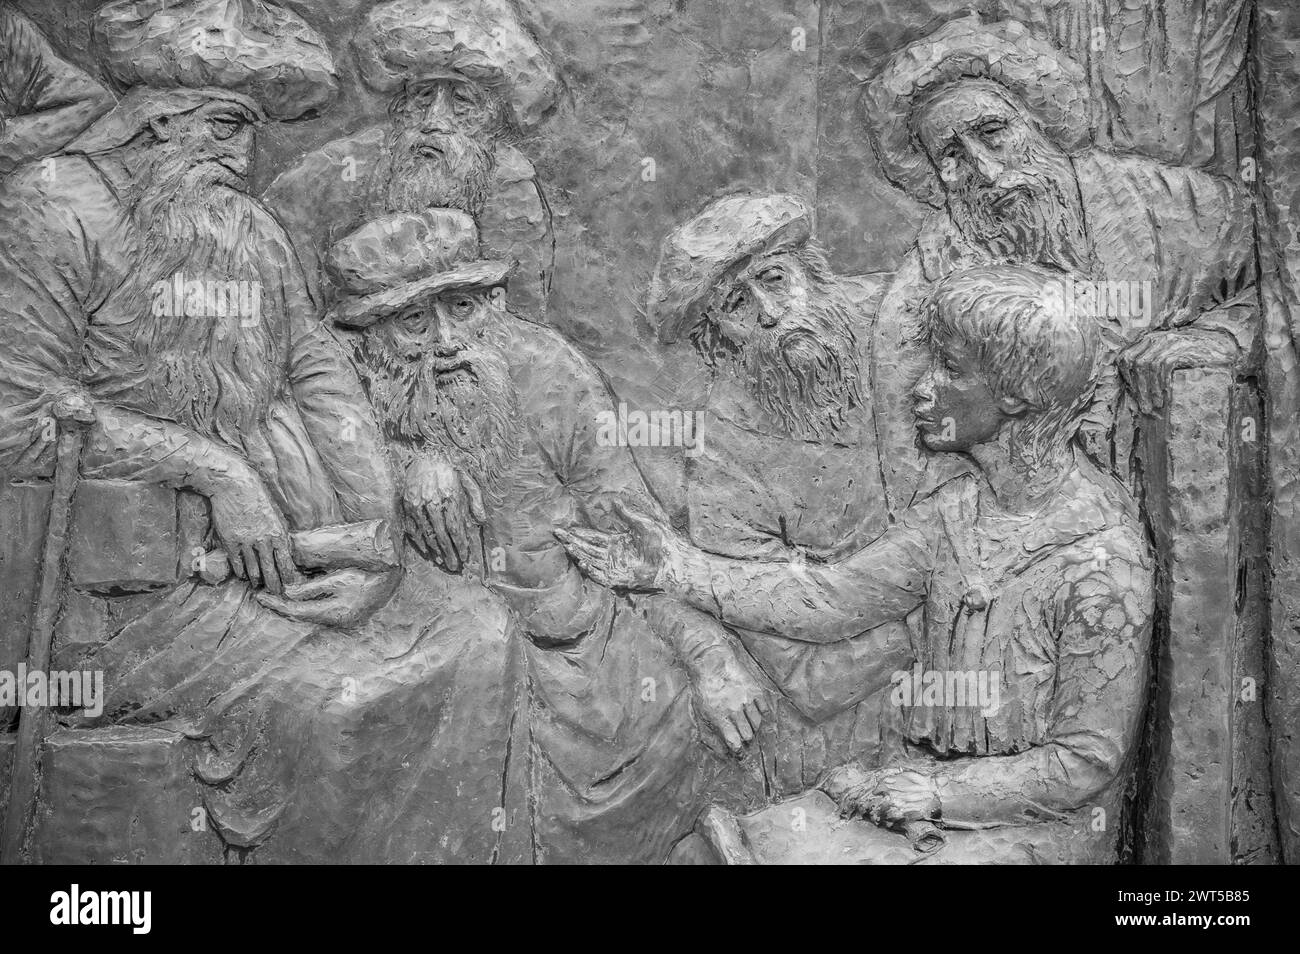 The Finding of Jesus in the Temple – Fifth Joyful Mystery of the Rosary. A relief sculpture on Mount Podbrdo (the Hill of Apparitions) in Medjugorje. Stock Photo